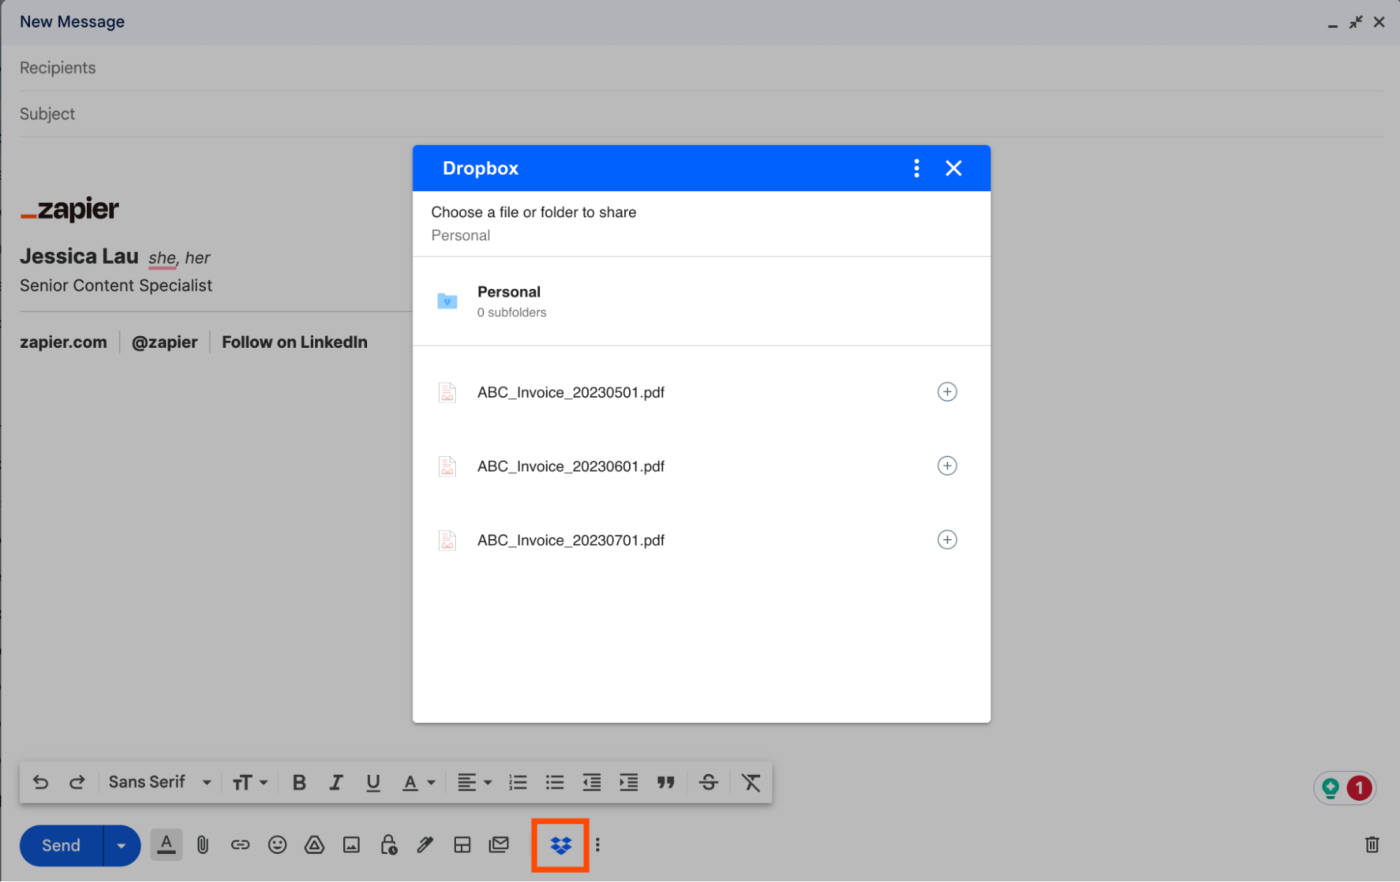 New message composition box in Gmail with a Dropbox pop-up window, which displays a list of files stored in Dropbox.